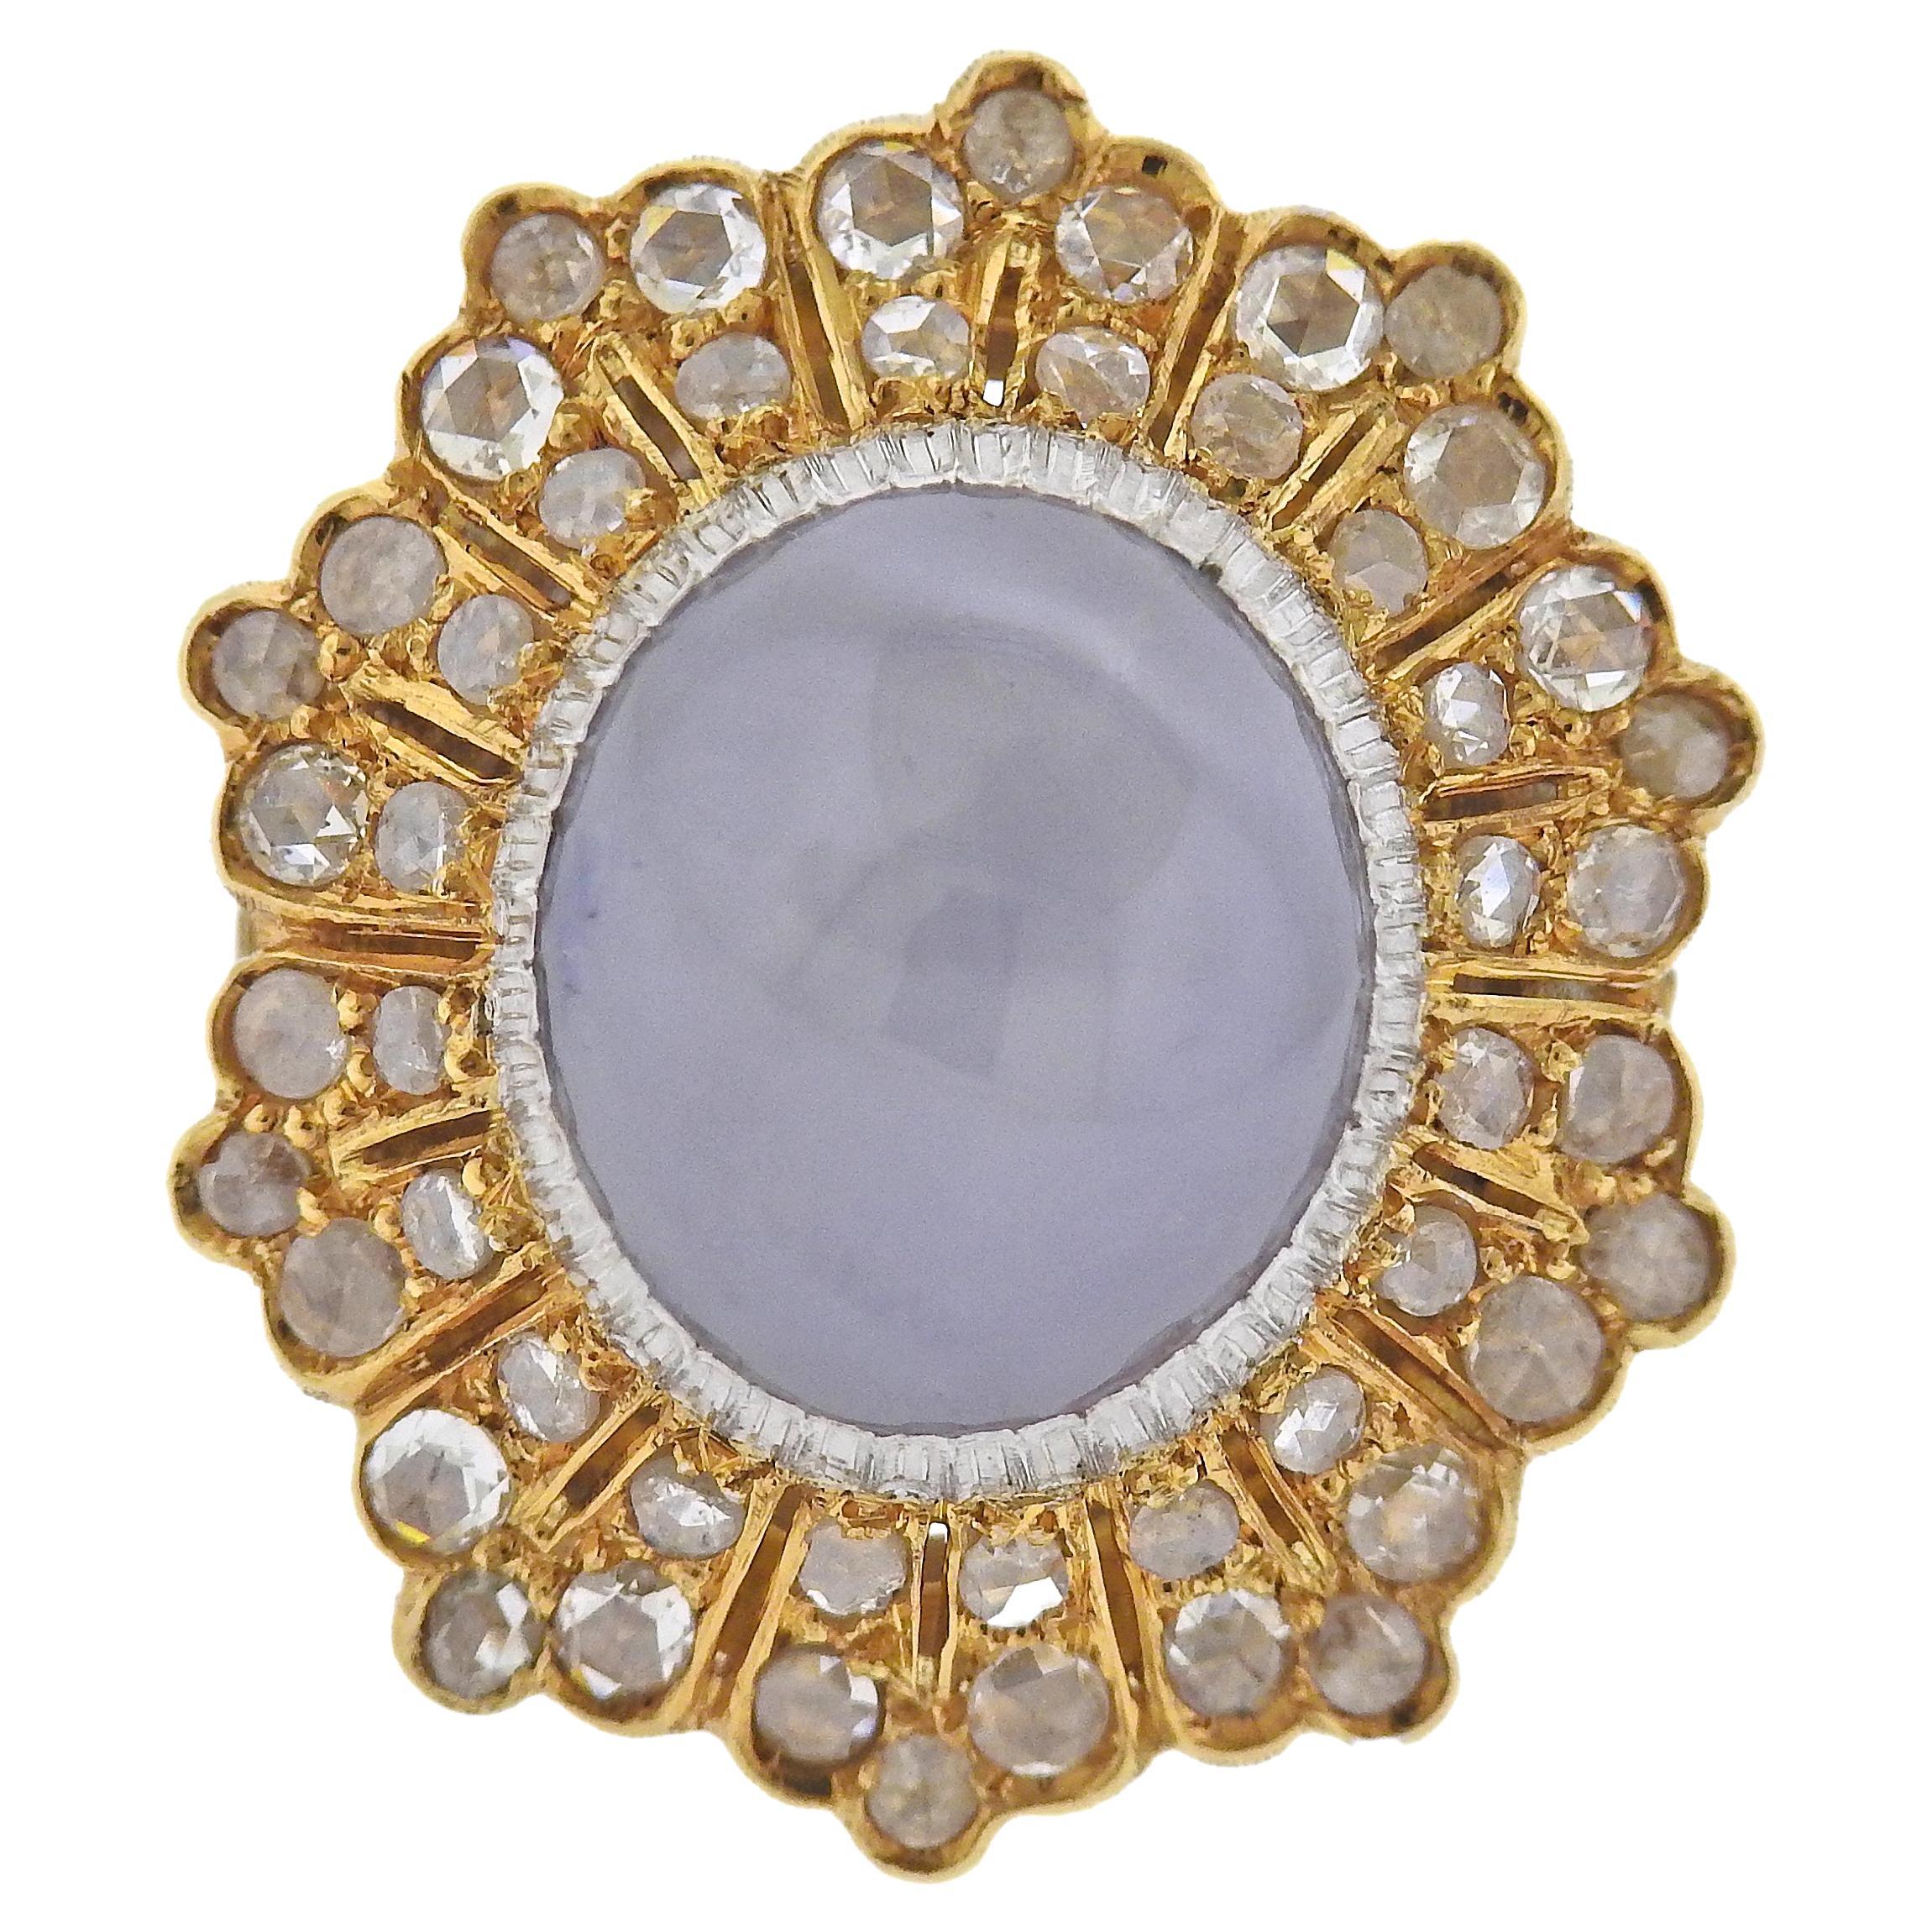 Buccellati 14.97ct Star Sapphire Cabochon Diamond Gold Cocktail Ring For Sale